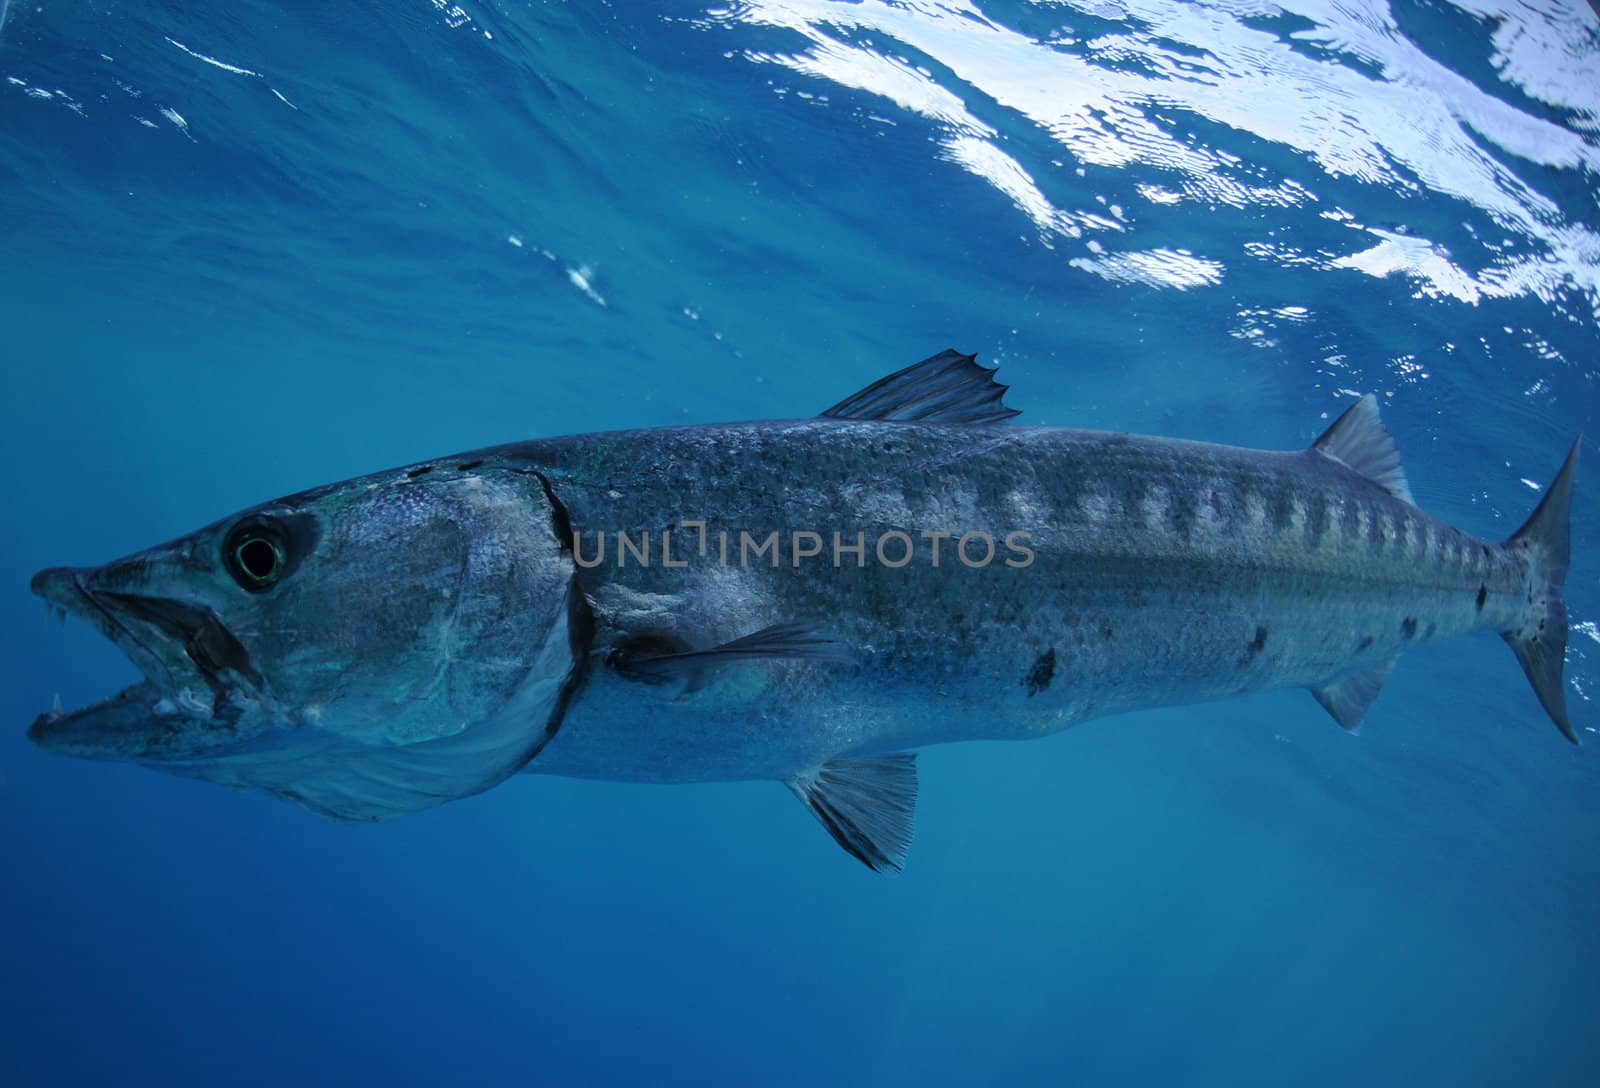 Barracuda with open mouth and teeth swimming in ocean by ftlaudgirl